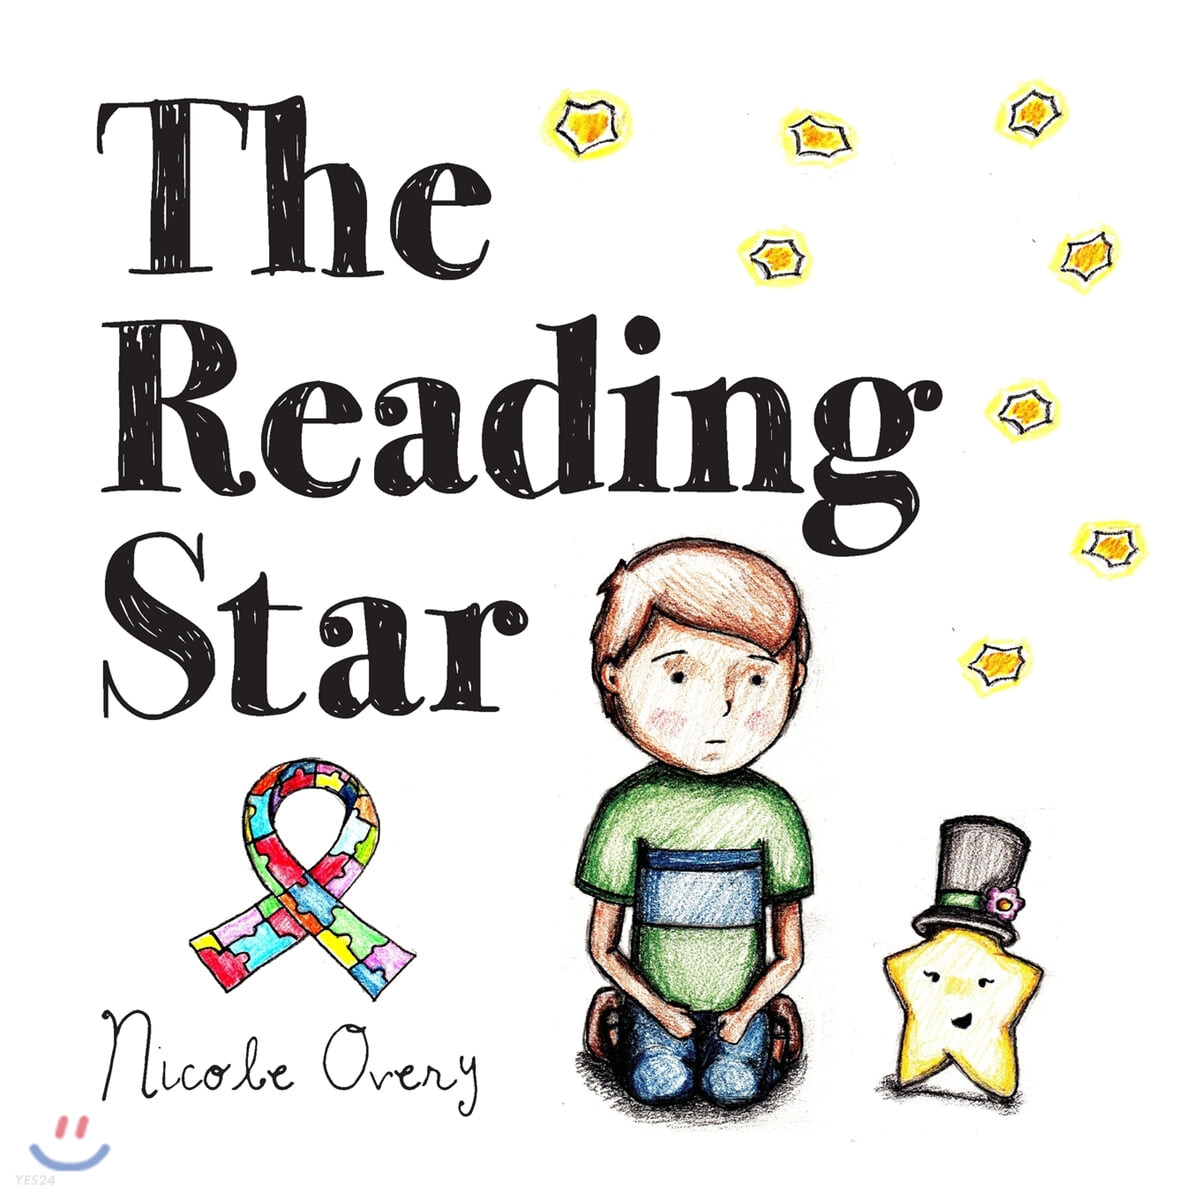 The Reading Star